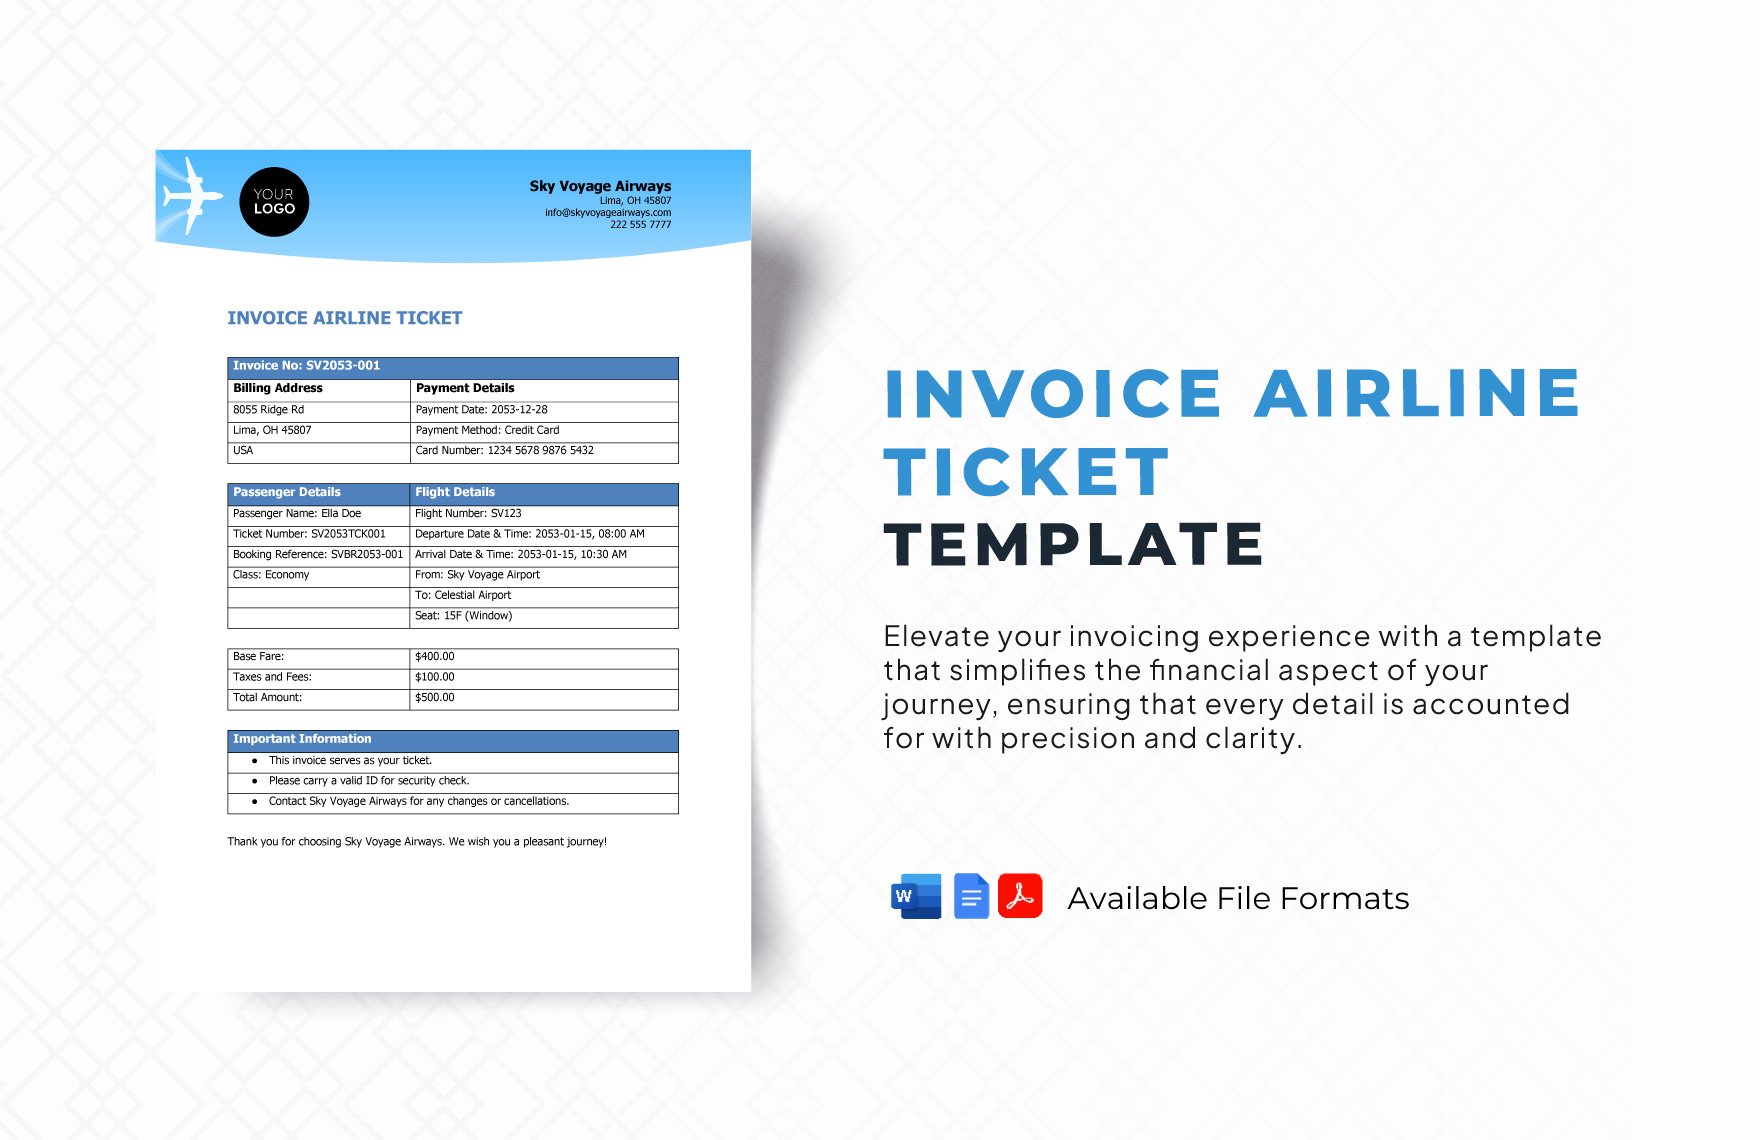 Invoice Airline Ticket Template